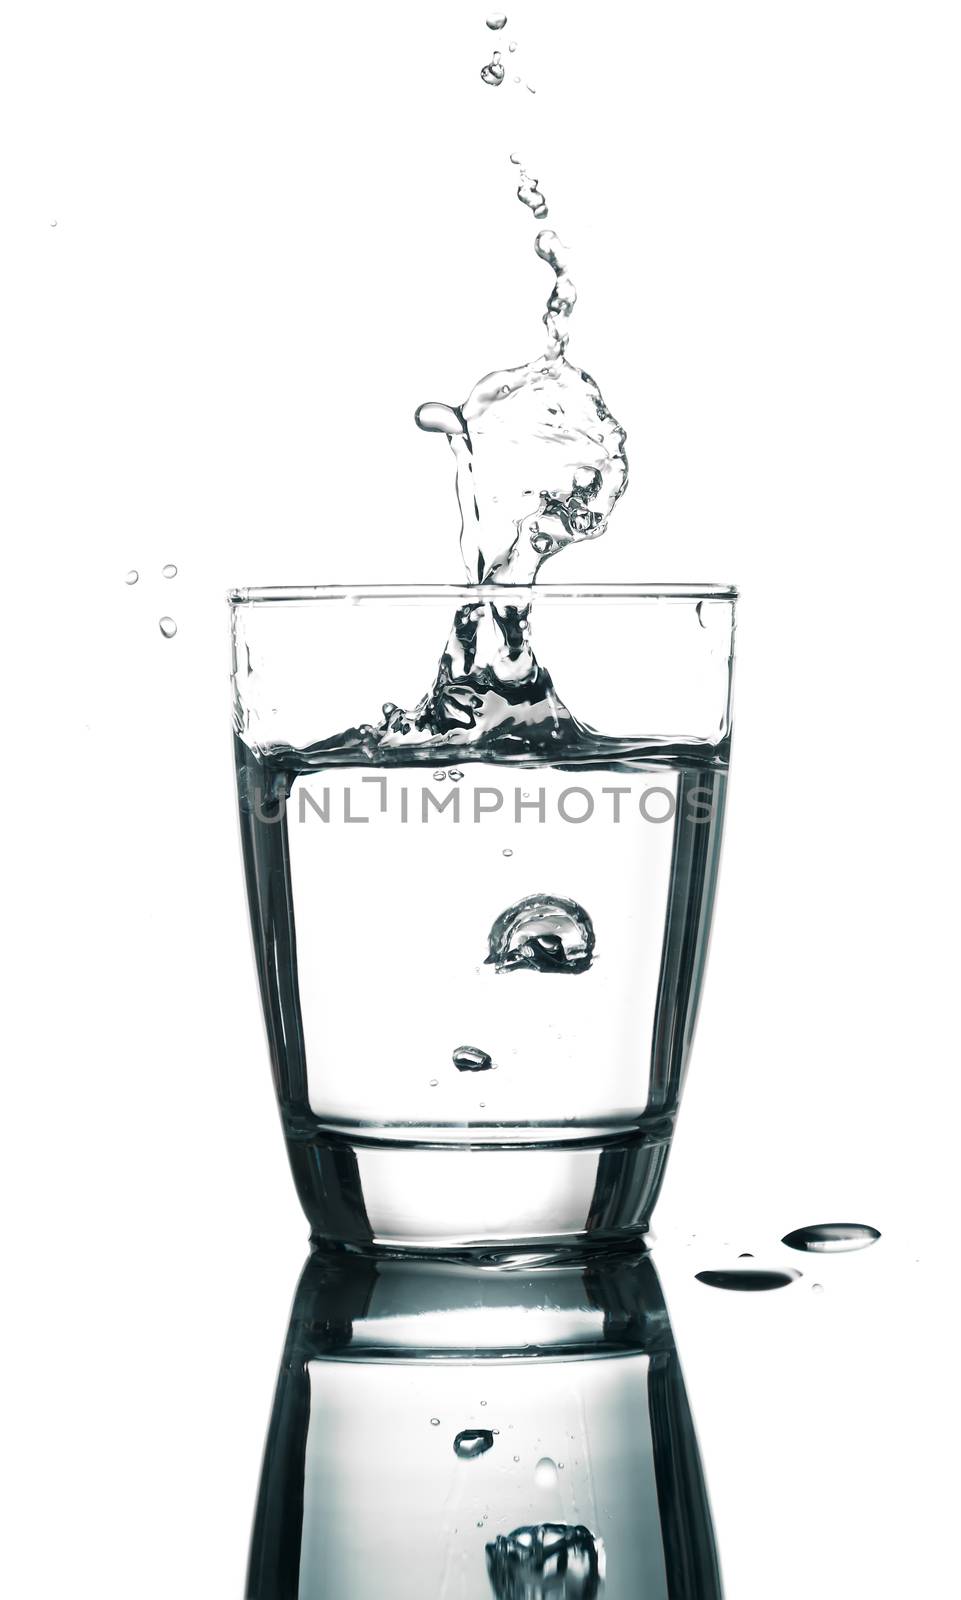 pouring water on a glass on white background by motorolka